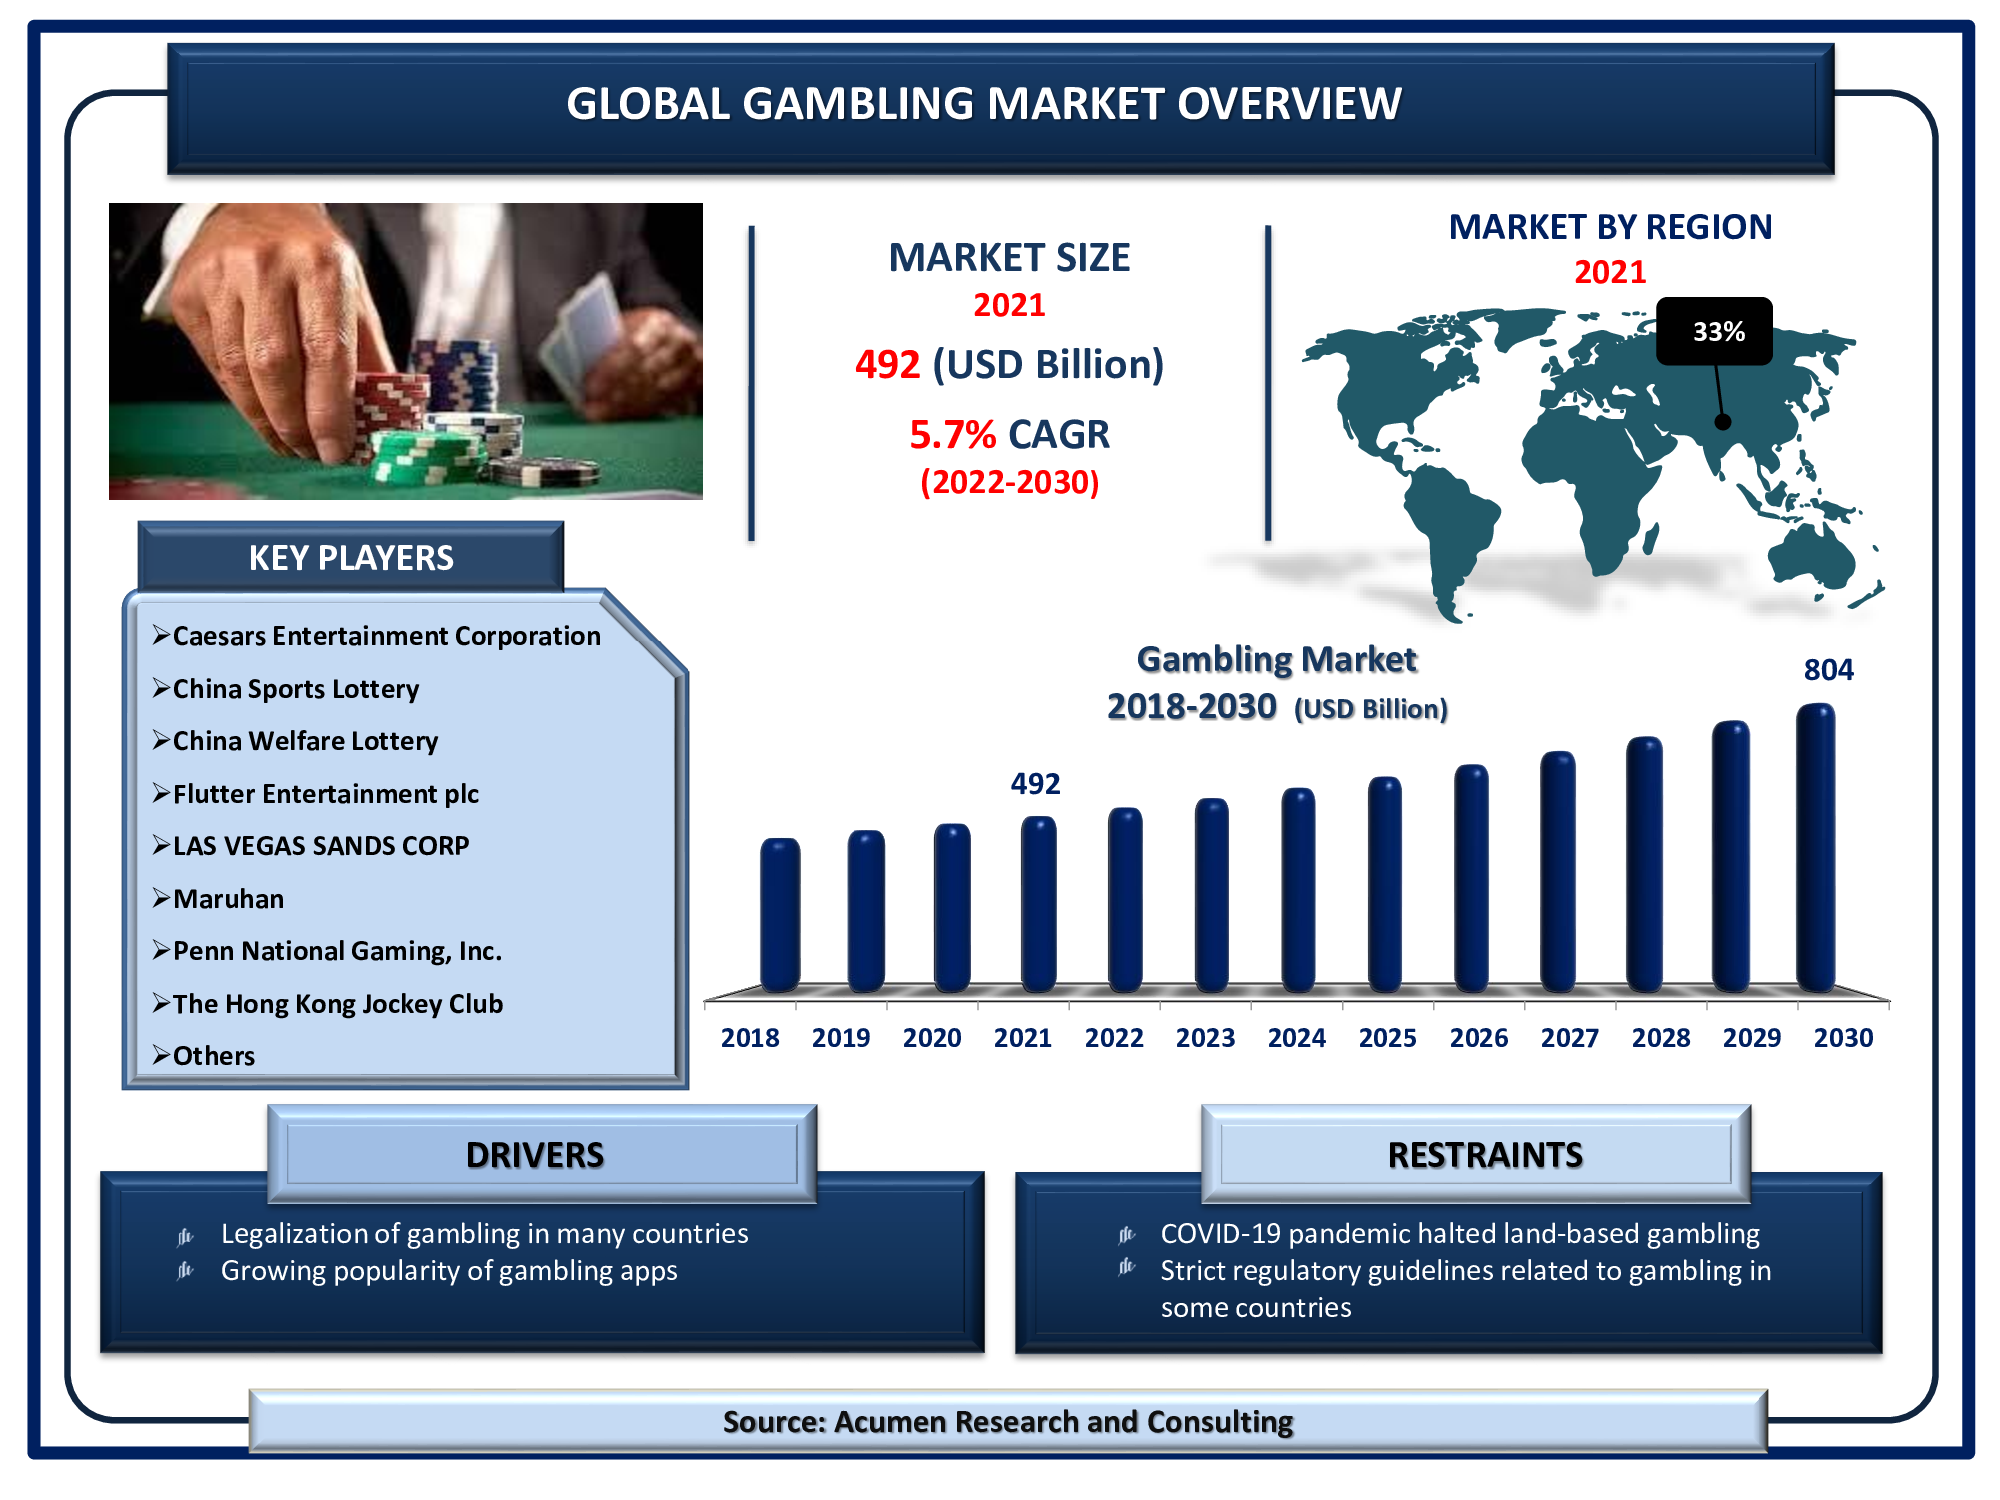 Gambling Market size accounted for USD 492 billion in 2021 and is projected to reach a market size of USD 804 billion by 2030; growing at a CAGR of 5.7%.